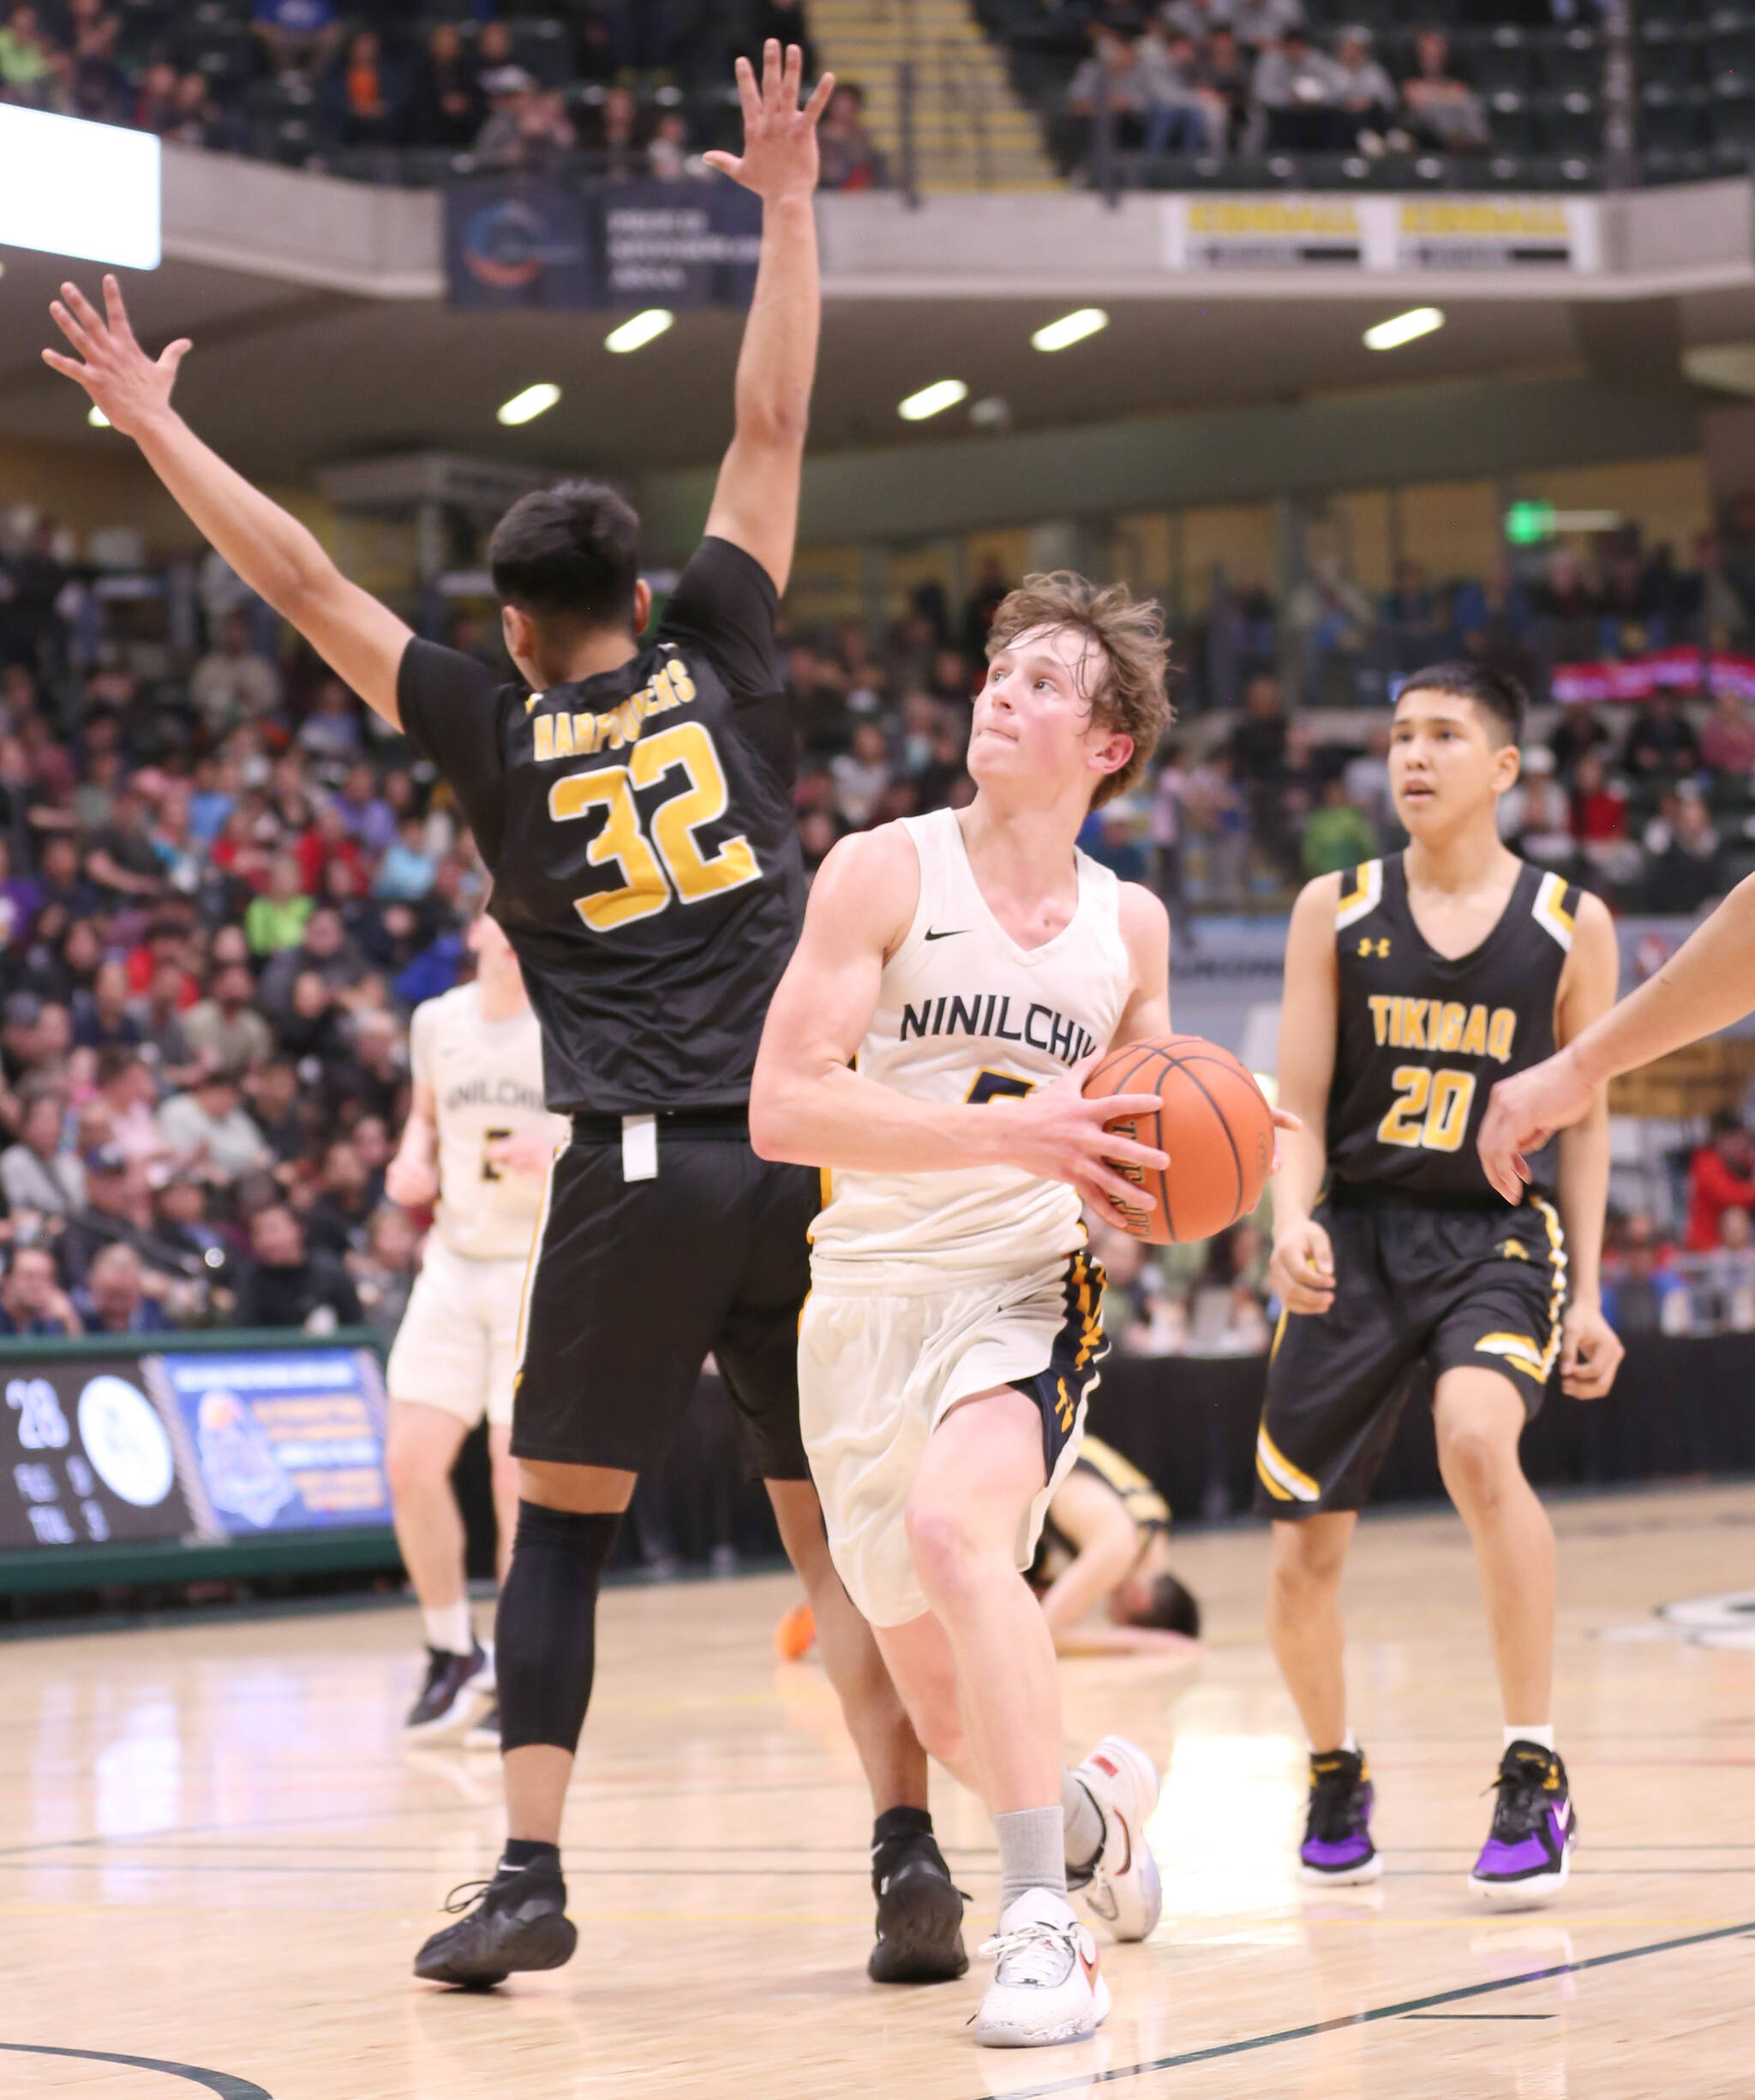 Ninilchik’s Kade McCorison drives to the basket against Tikigaq in the Class 2A boys state championship game Saturday, March 18, 2023, at the Alaska Airlines Center in Anchorage, Alaska. (Photo courtesy of Robin Moore)